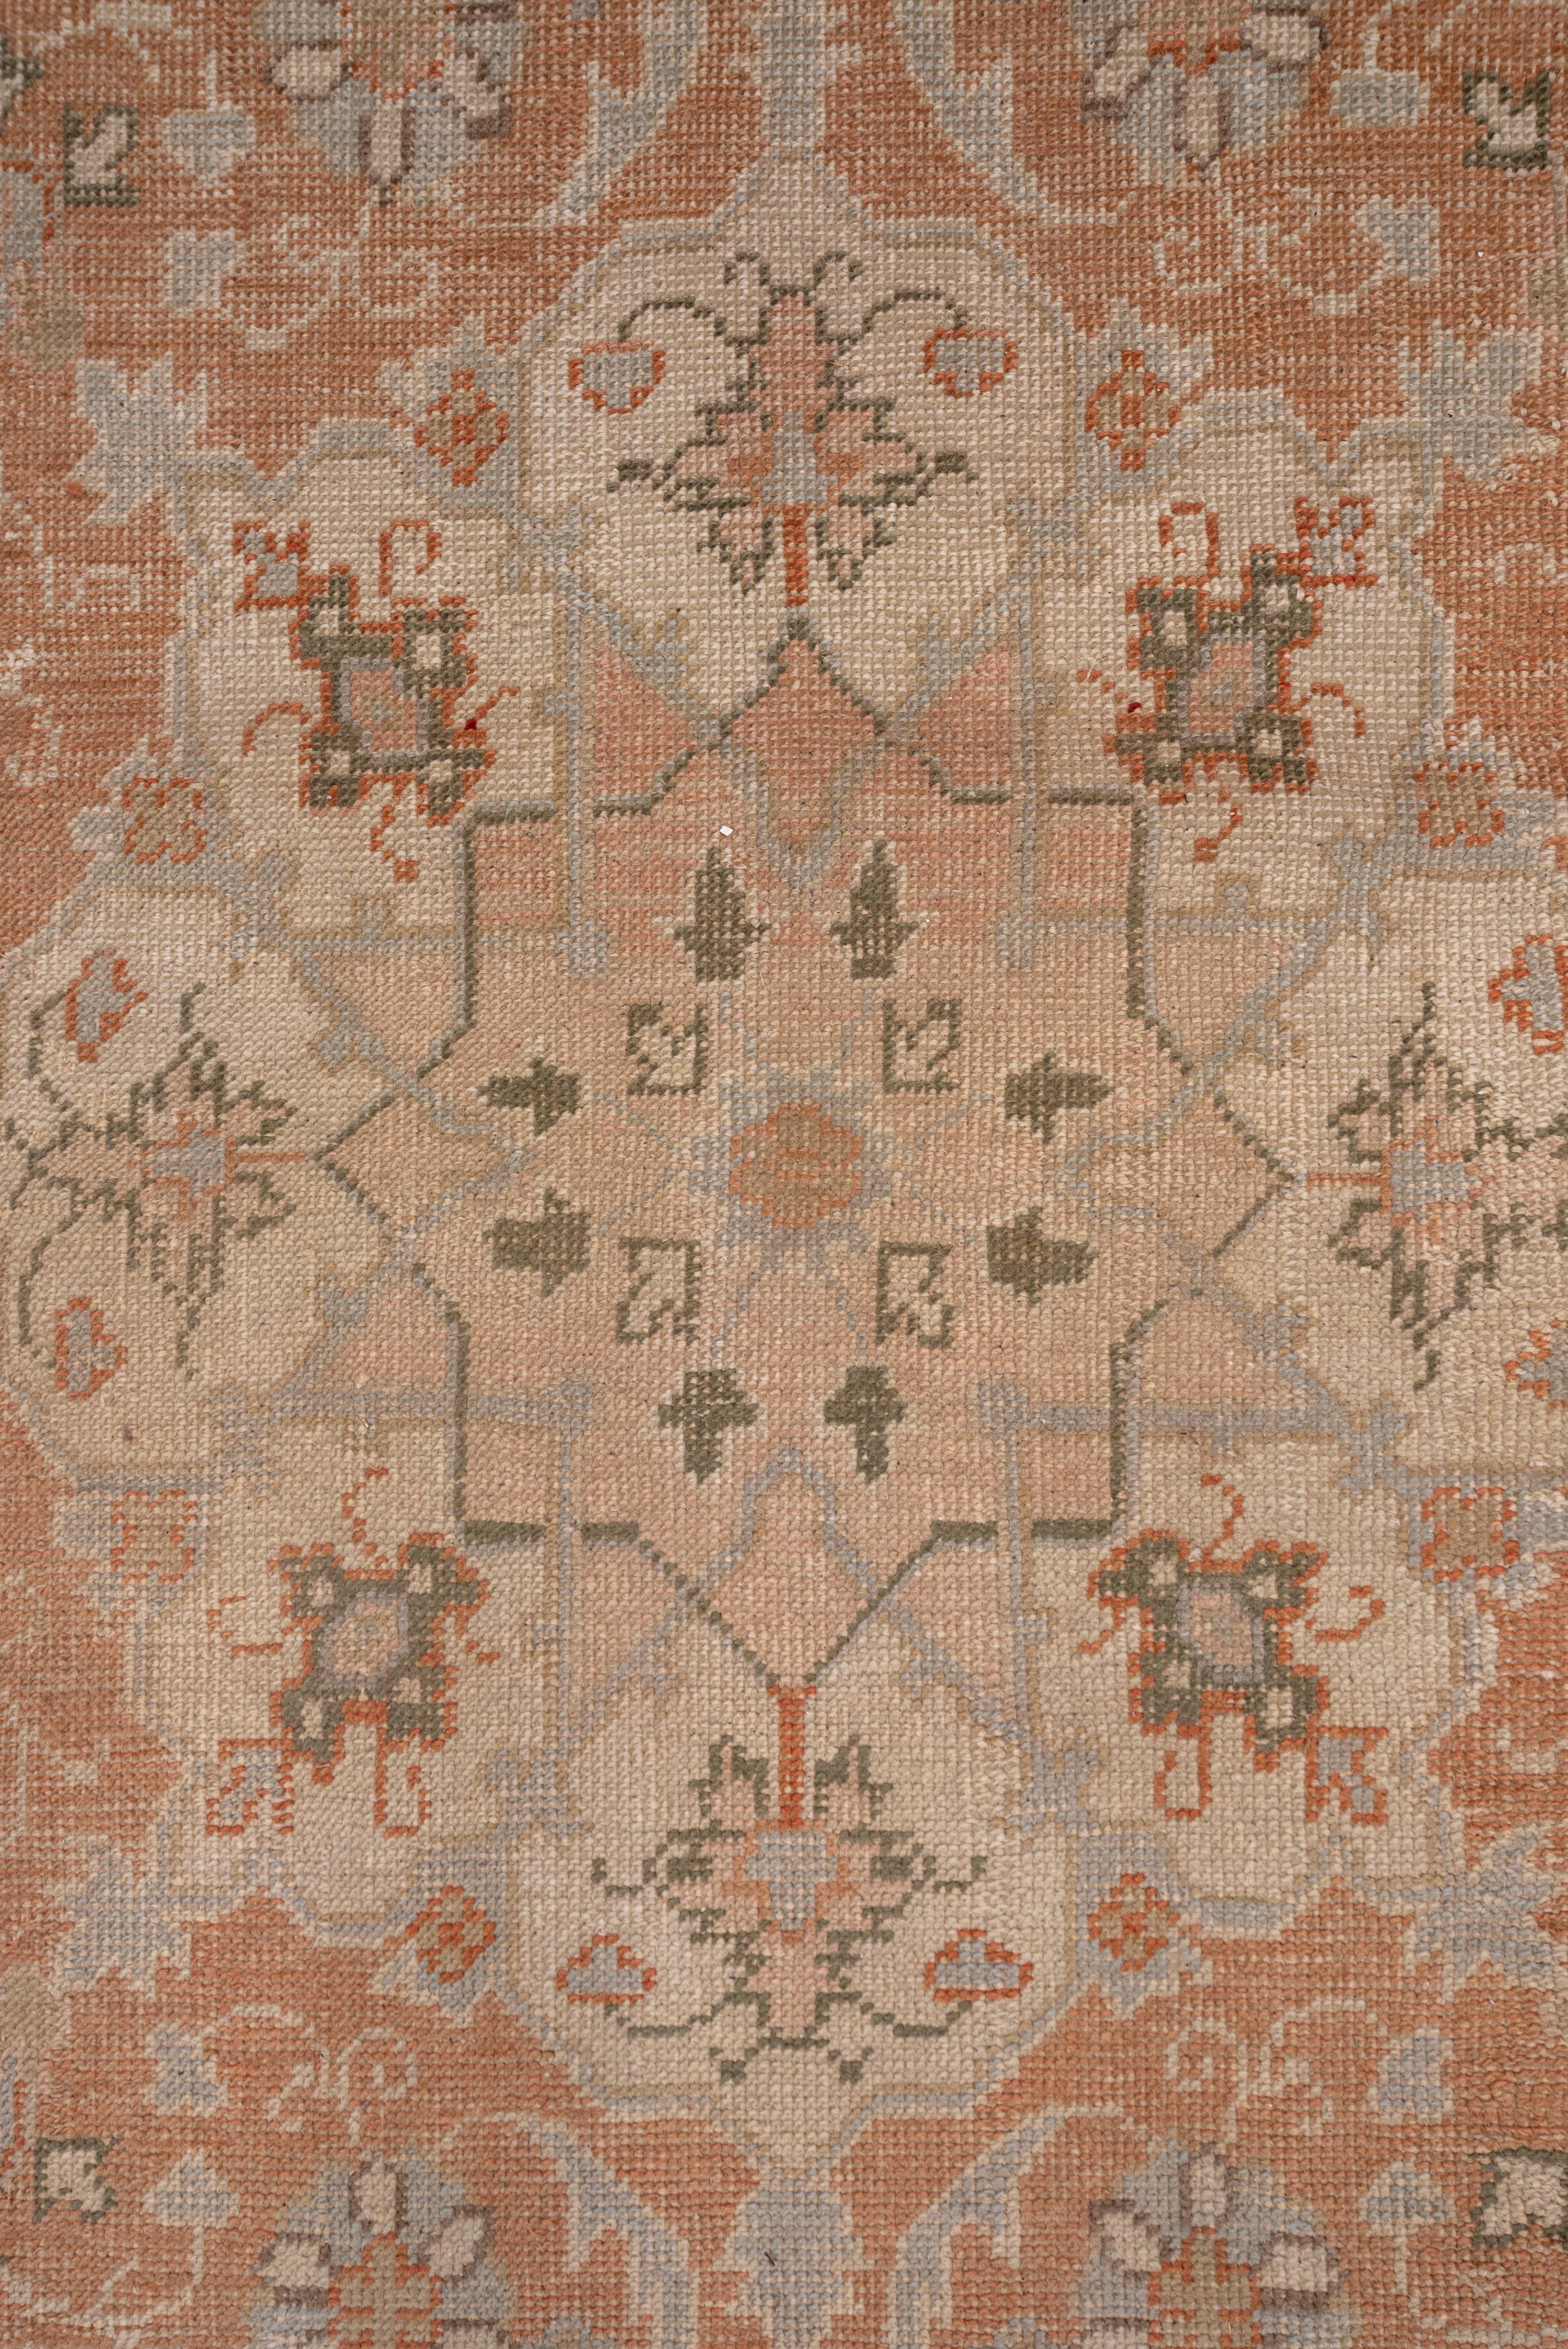 Hand-Knotted Antique Oversized Oushak Carpet, Salmon Palette, circa 1920 For Sale